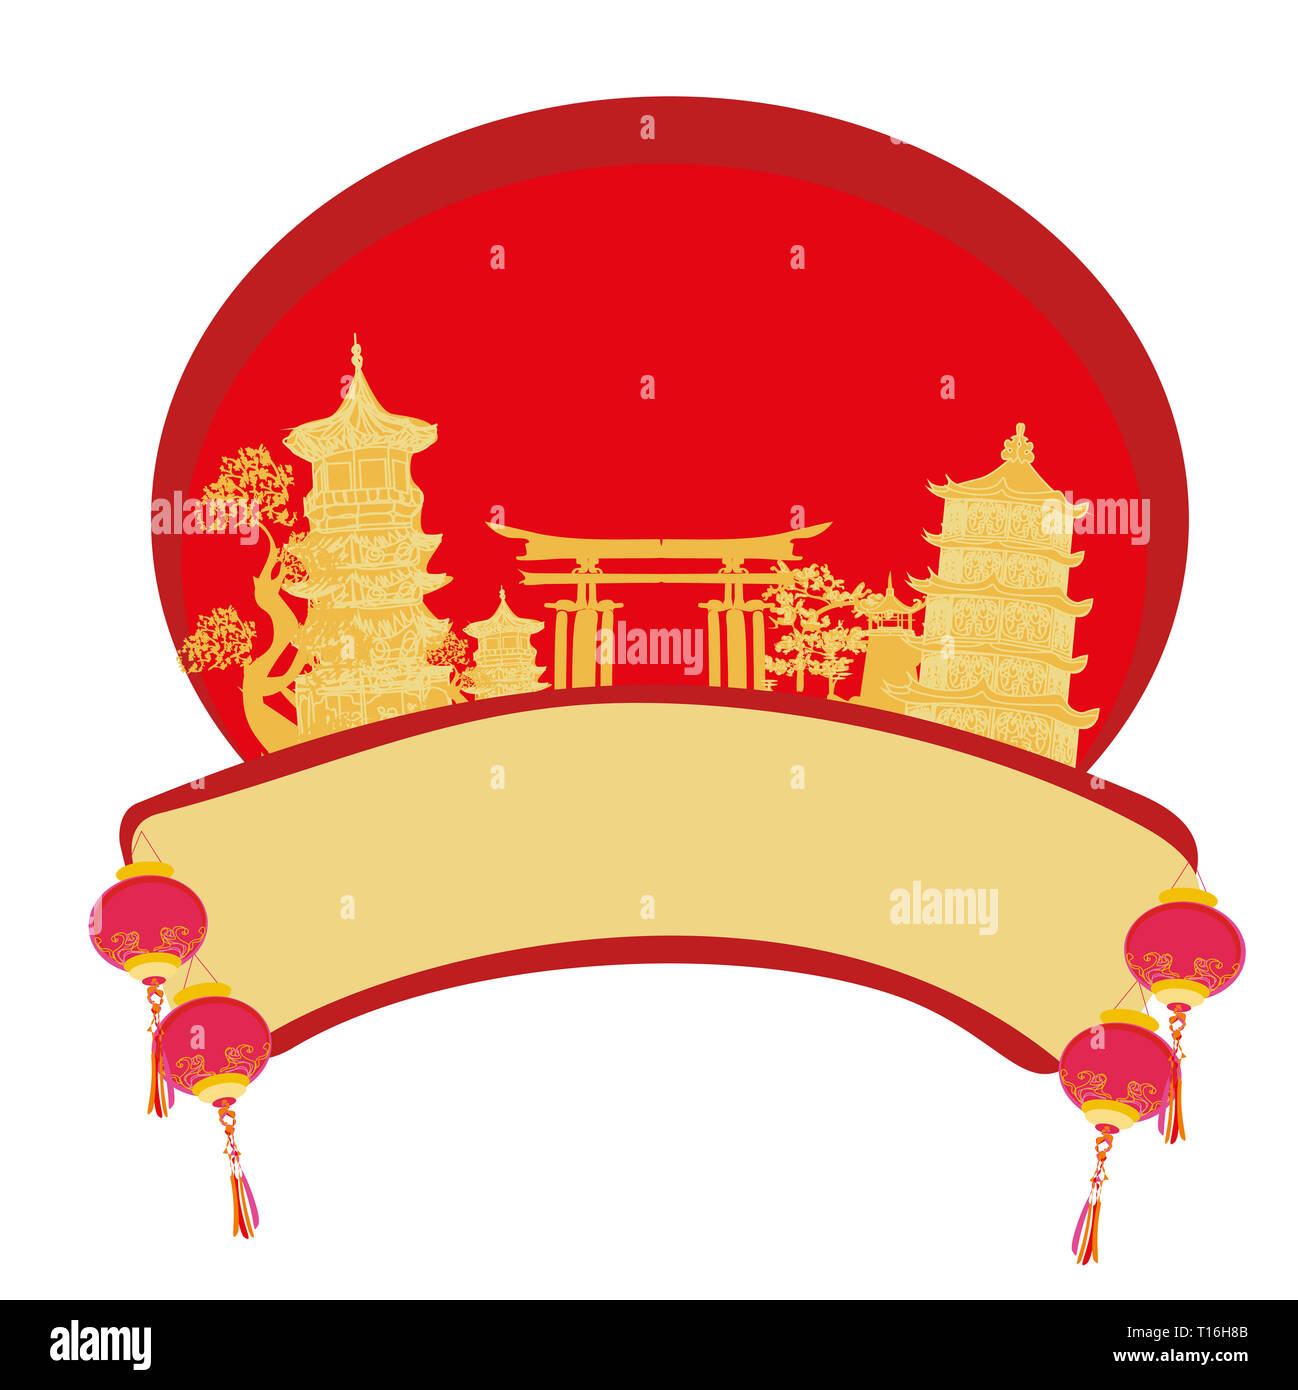 27,042 Chinese Mid Autumn Festival Design Images, Stock Photos & Vectors